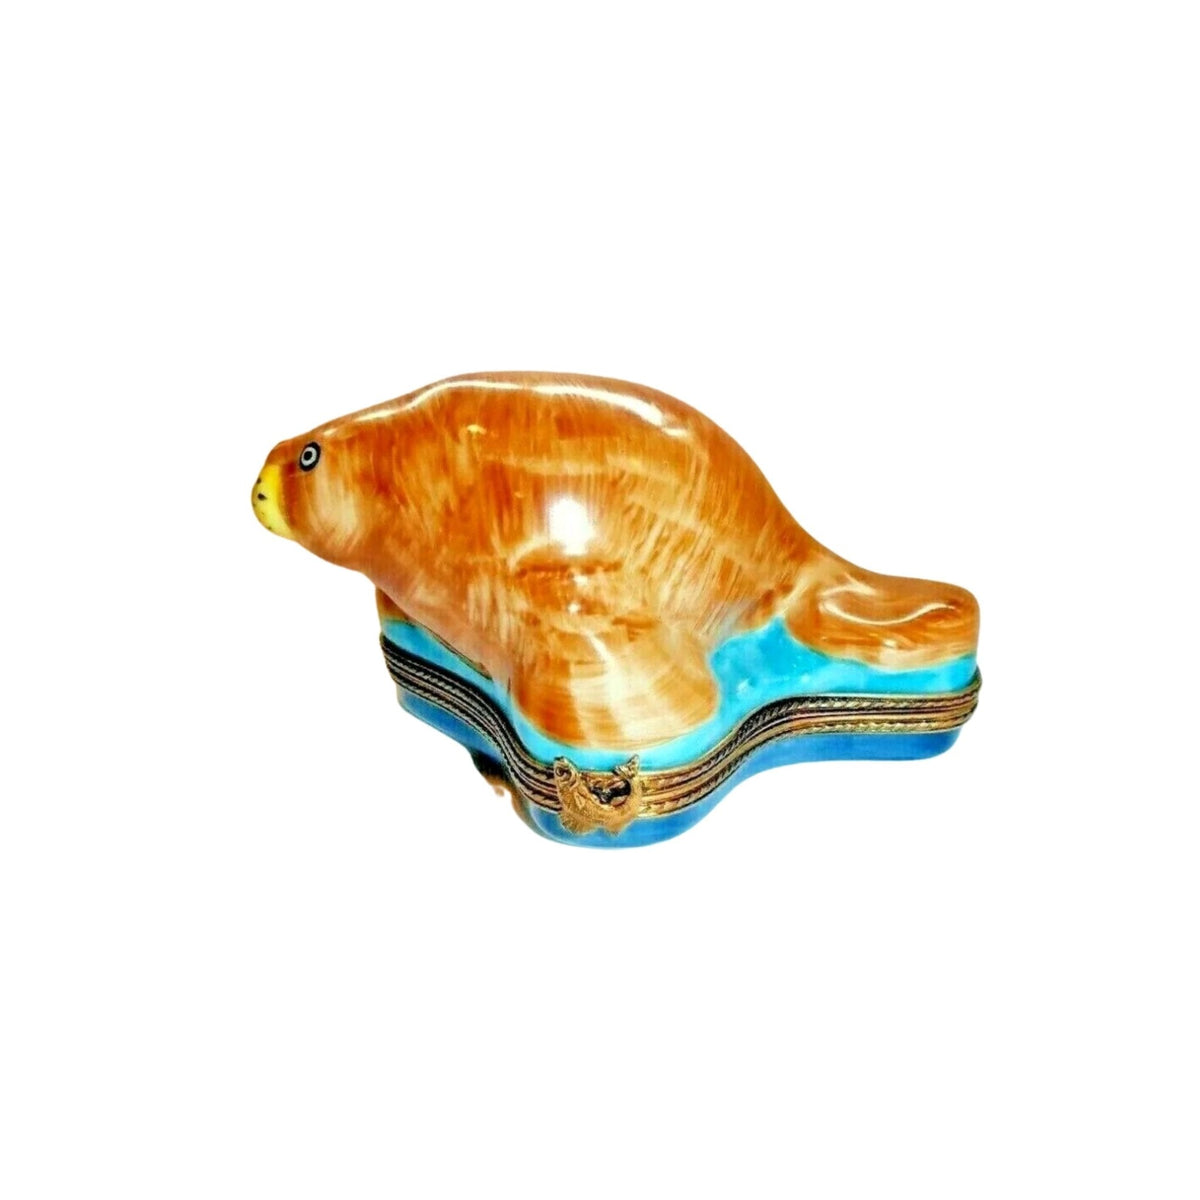 Handcrafted-figurine-depicting-a-wild-sea-cow-in-exquisite-detail